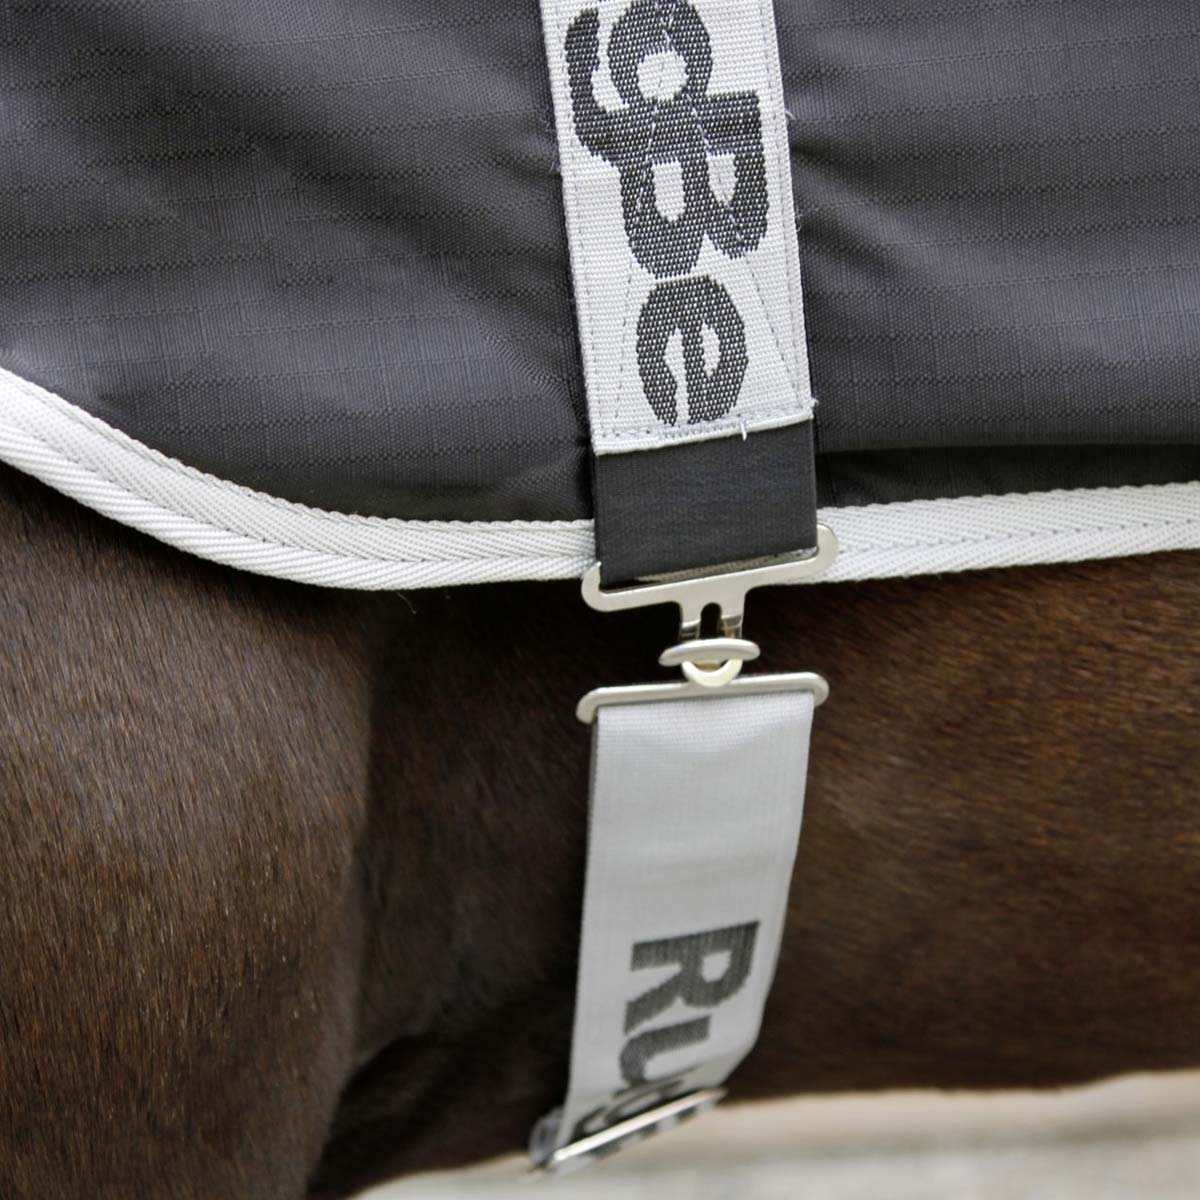 Covalliero RugBe Exercise Rug 600D 115